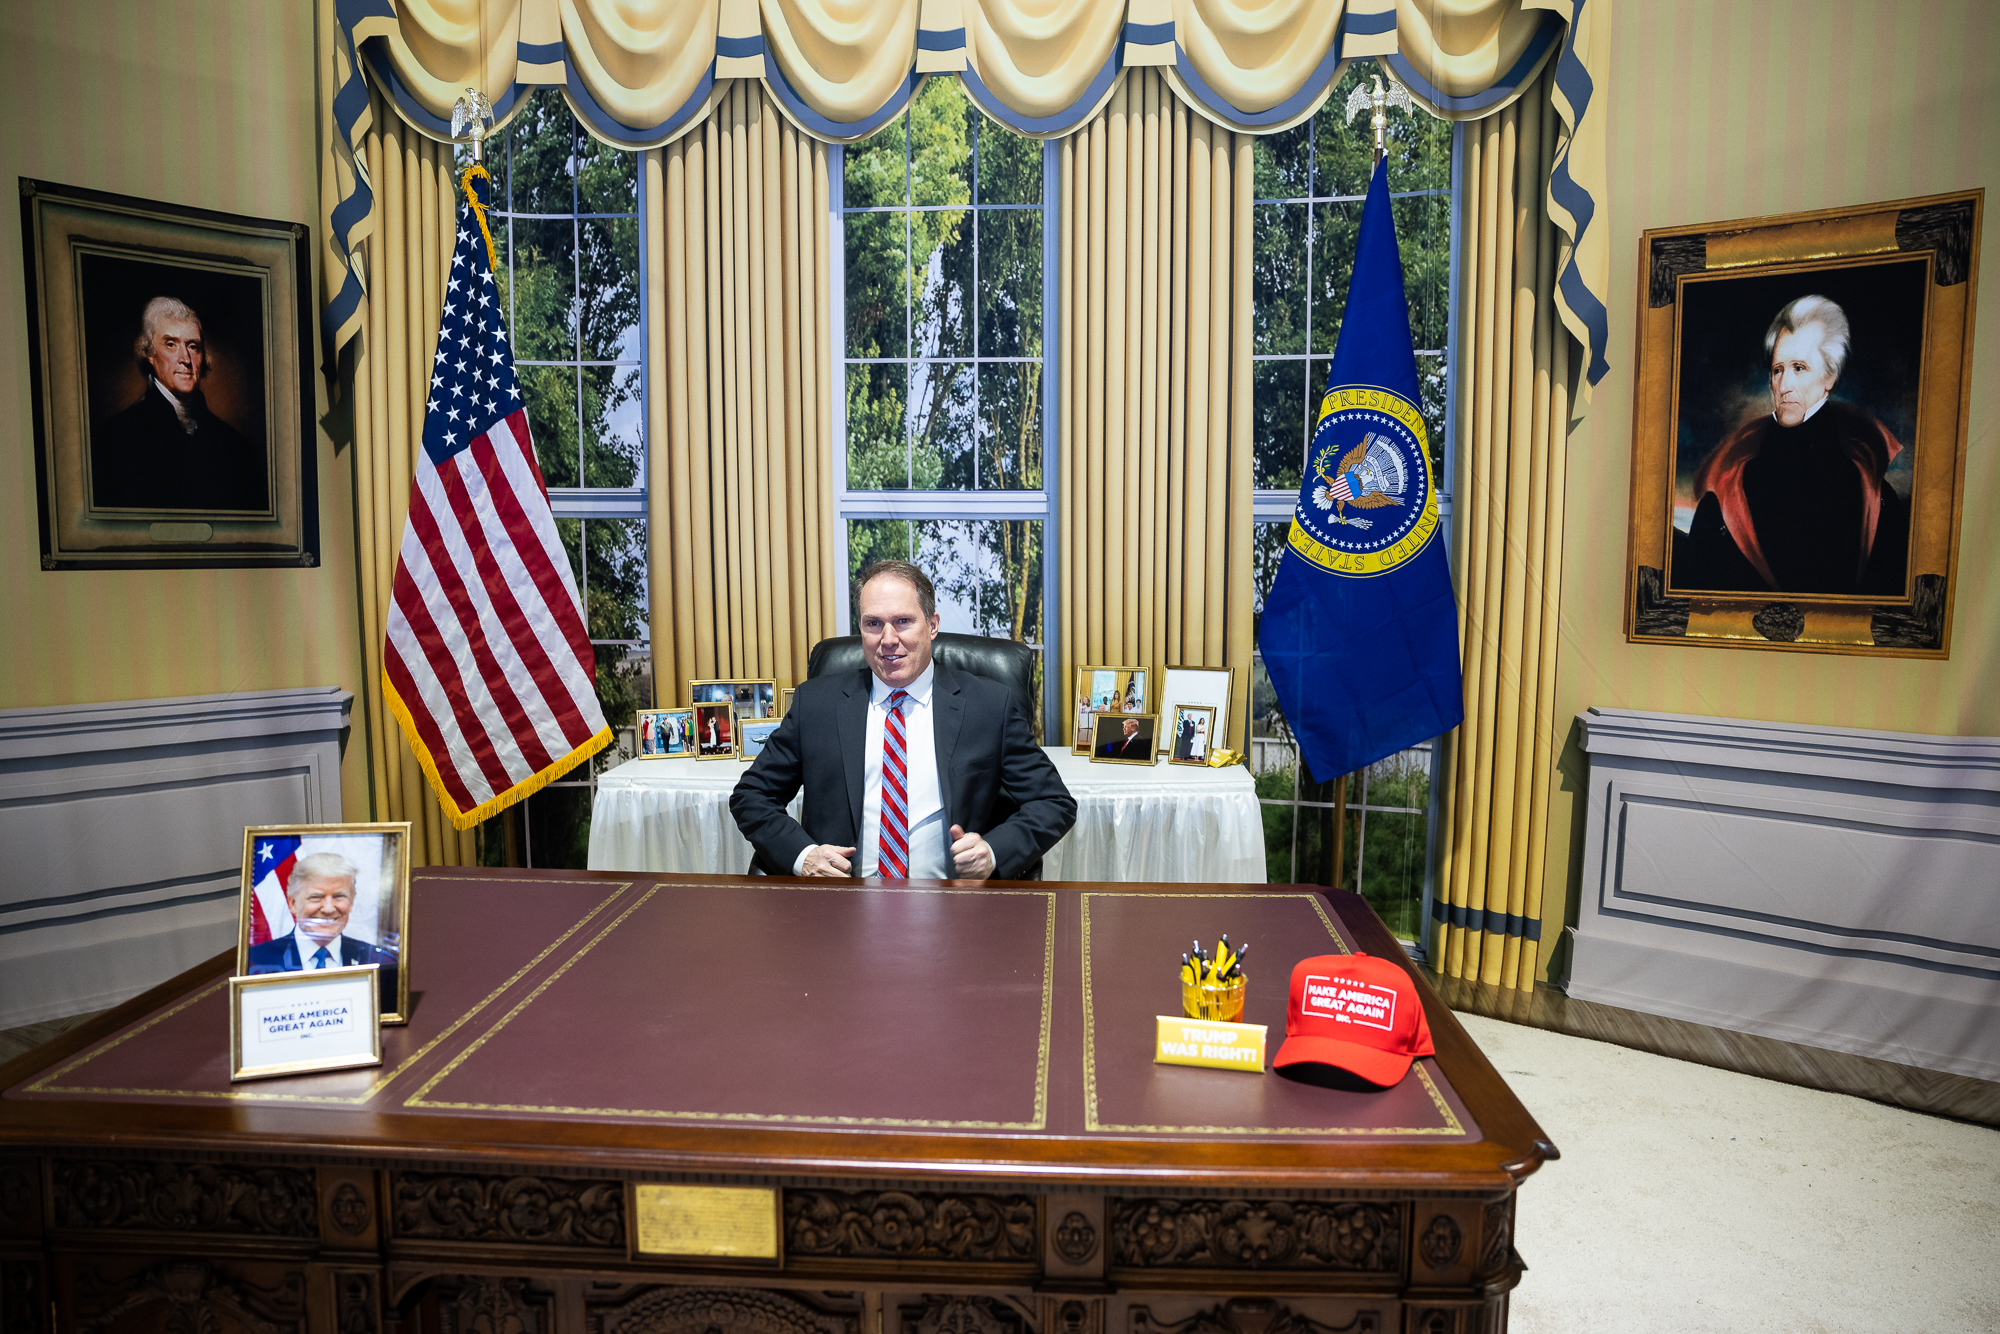 Former White House policy advisor Robert Bowes took a seat in a replica of the Trump Oval Office.